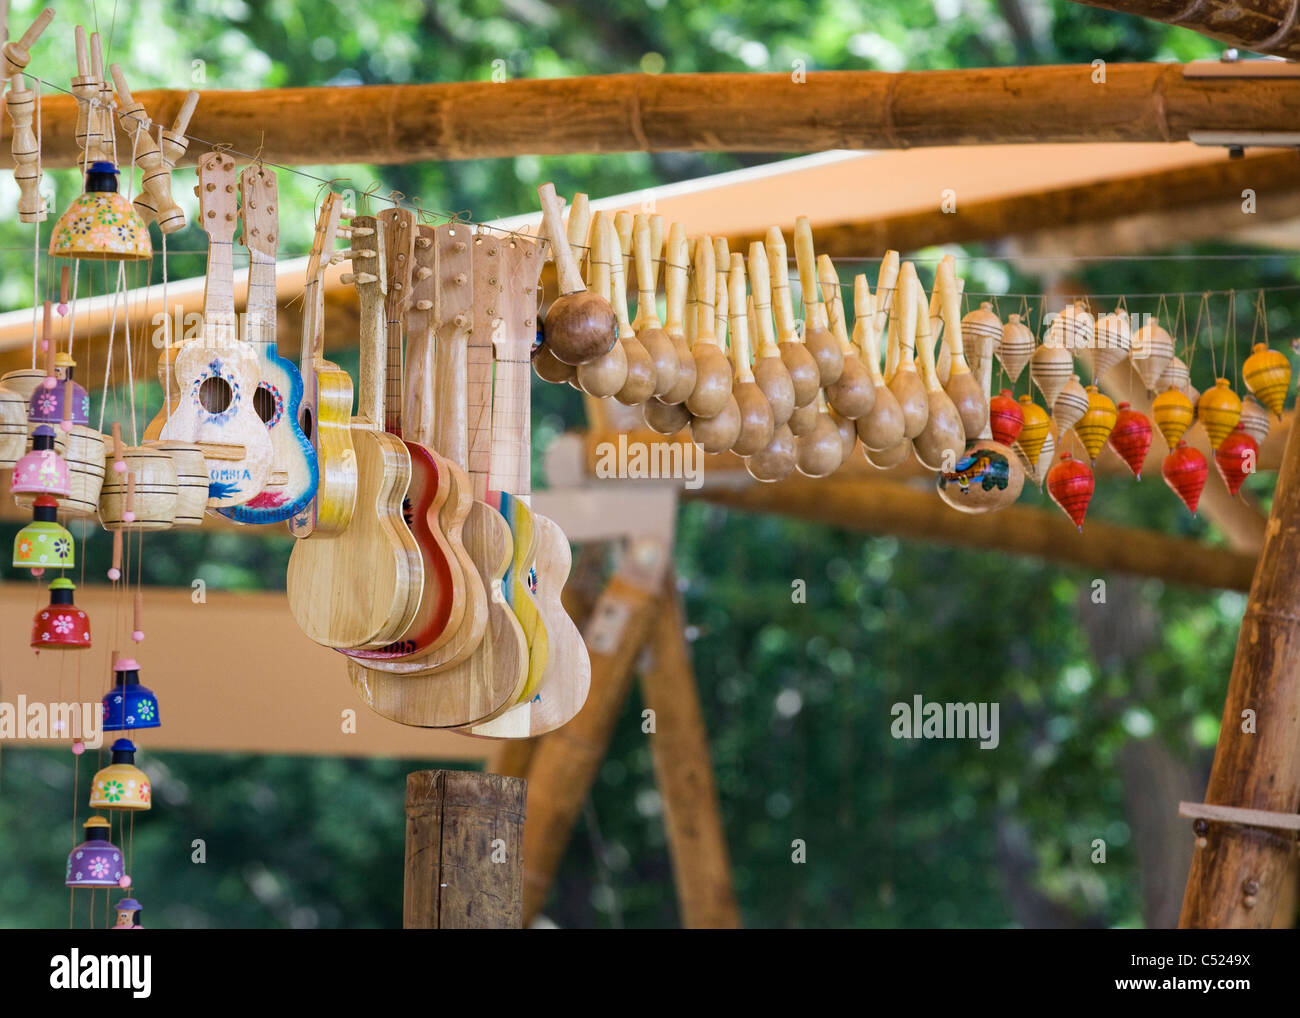 Handmade wooden musical instruments and toys hang on a wire Stock Photo